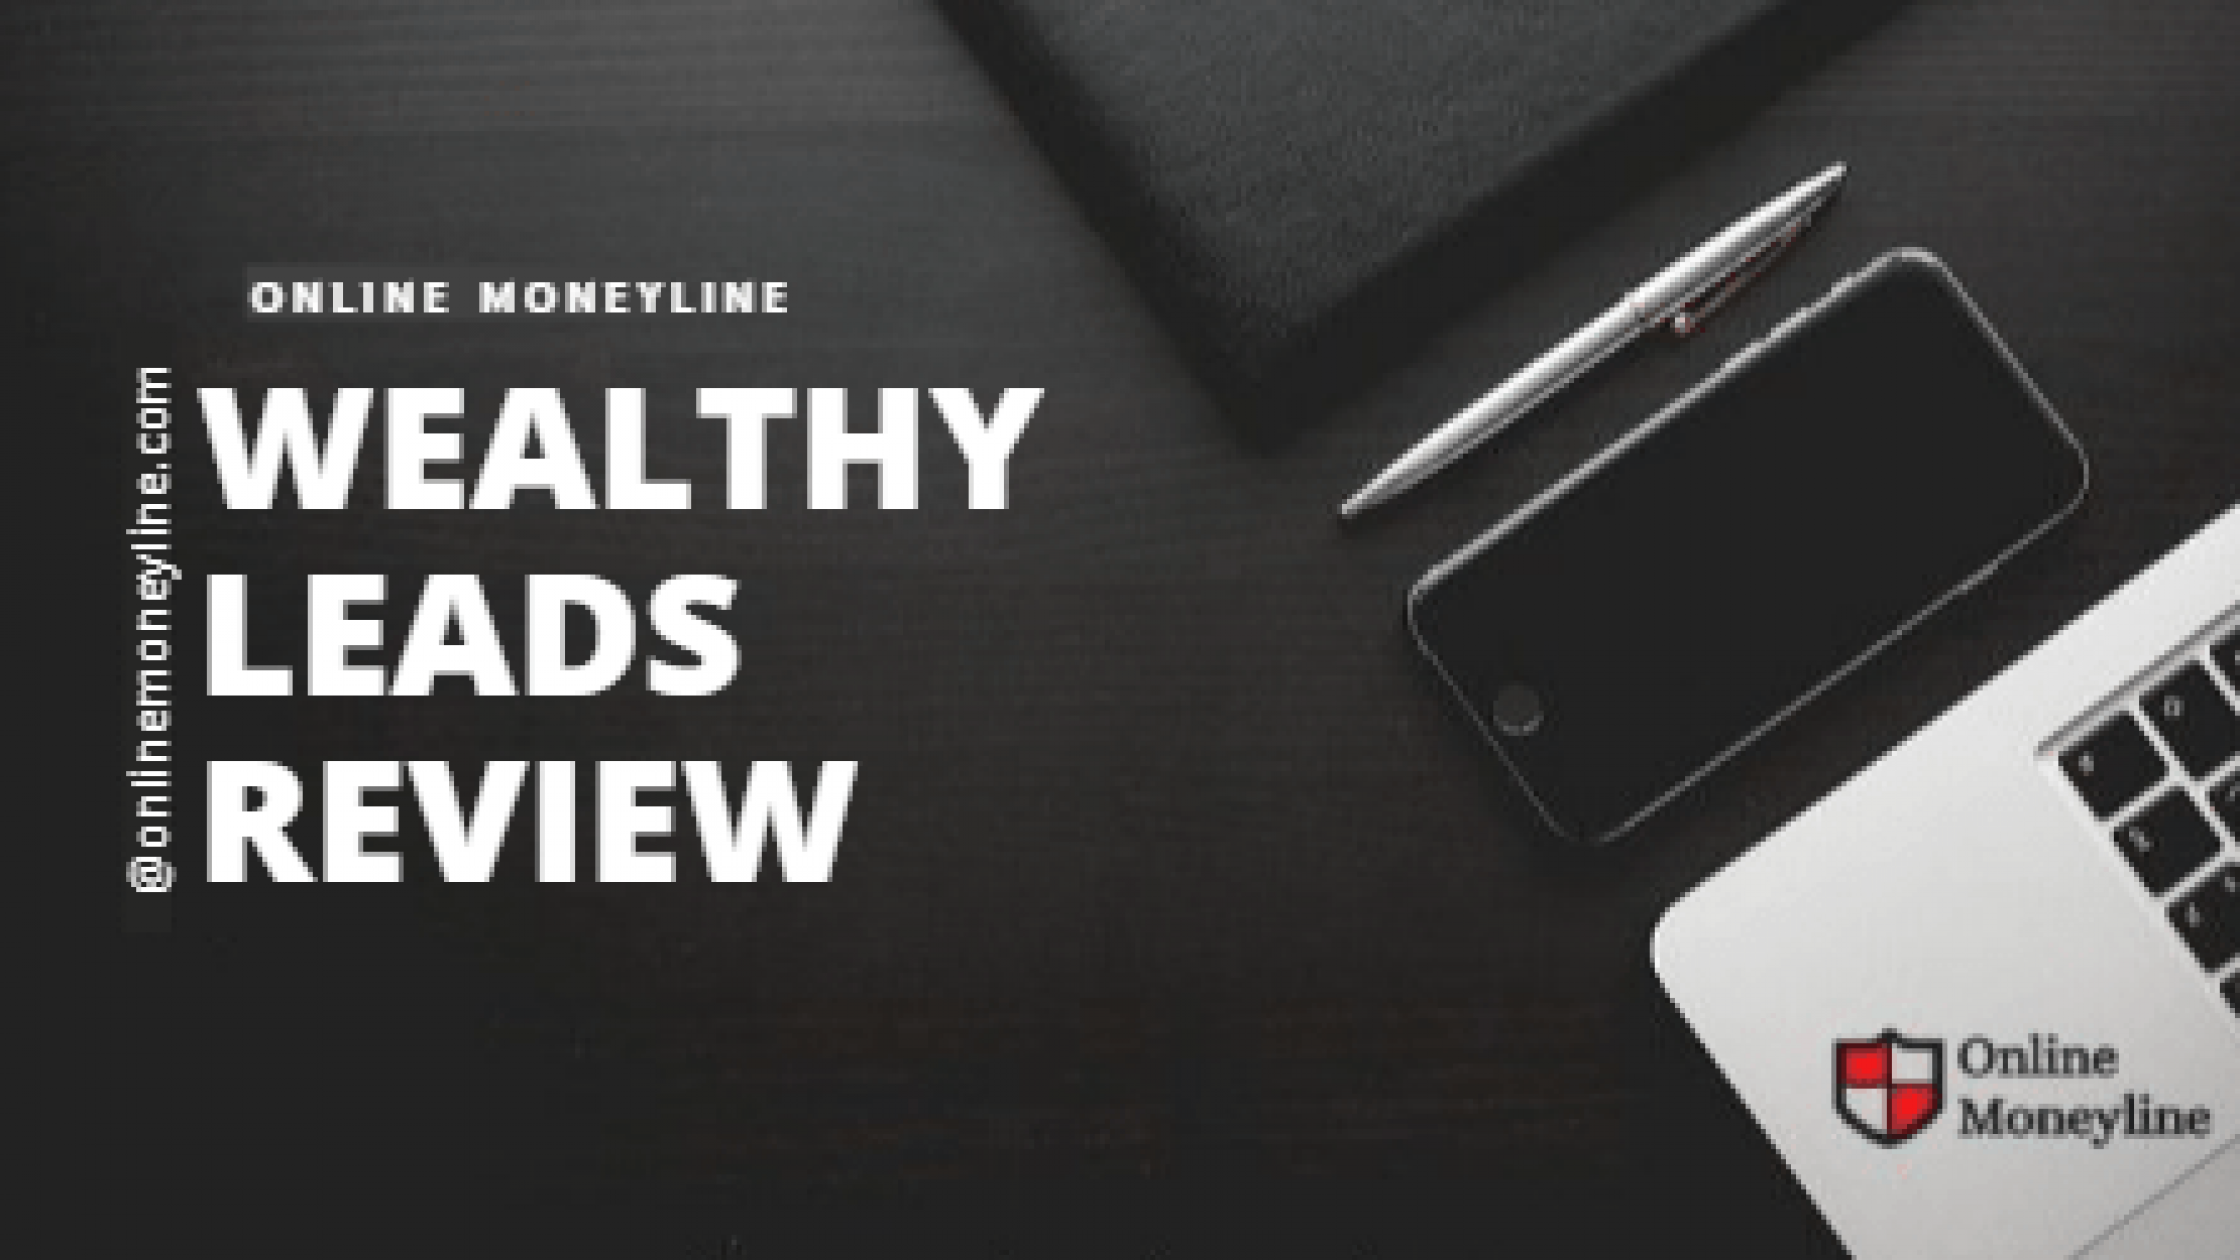 Wealthy Leads Review 